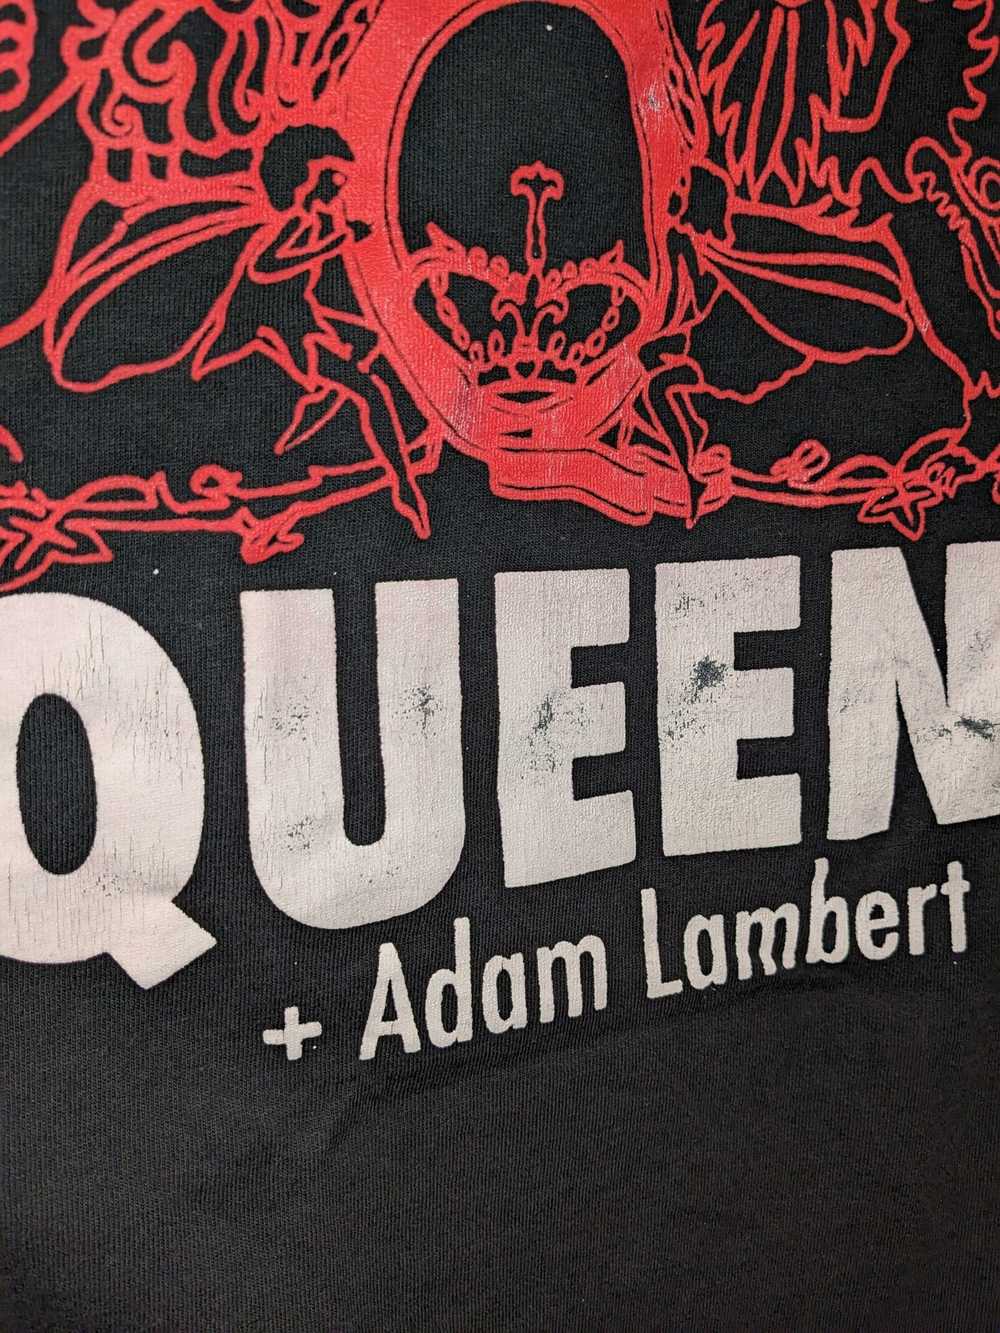 Band Tees × Queen Tour Tee × Vintage Vintage Quee… - image 6